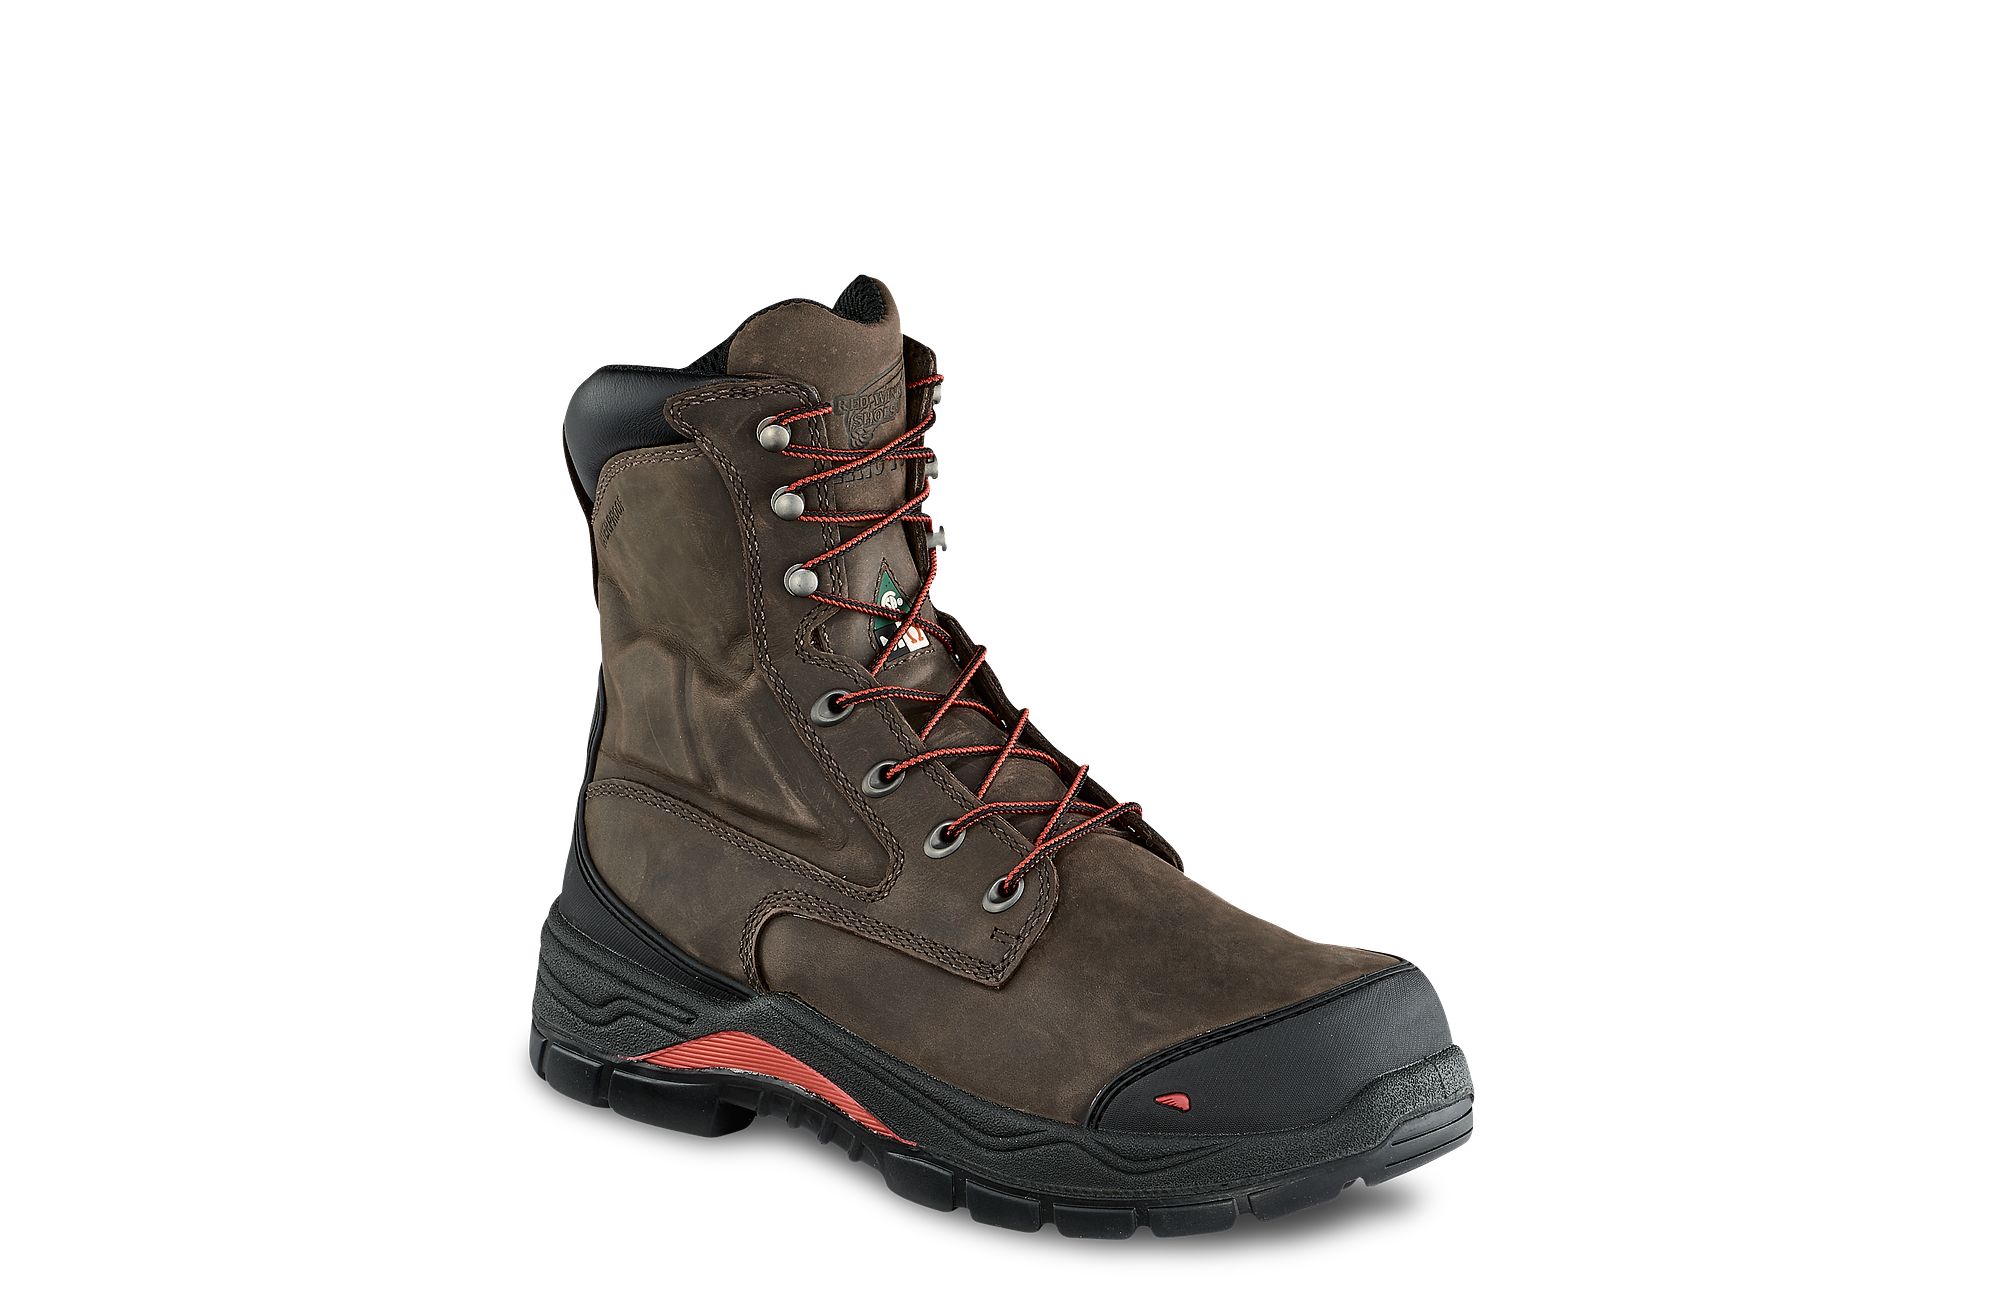 Red Wing Steel Toe Metatarsal Boots | ppgbbe.intranet.biologia.ufrj.br